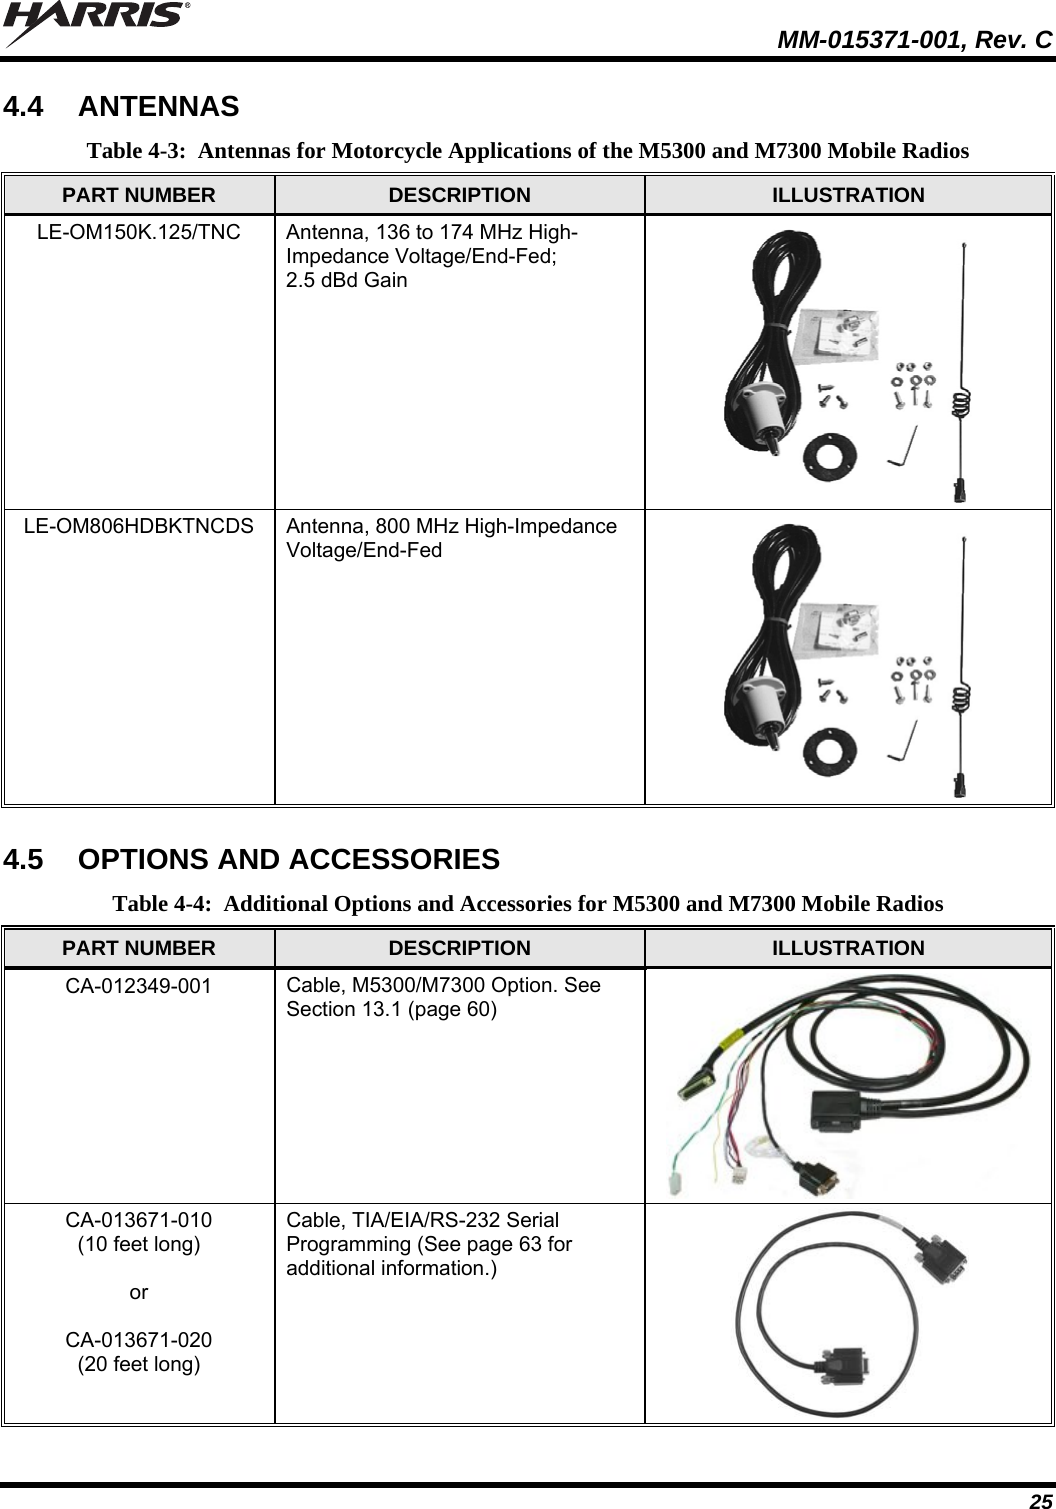   MM-015371-001, Rev. C 25 4.4  ANTENNAS  Table 4-3:  Antennas for Motorcycle Applications of the M5300 and M7300 Mobile Radios PART NUMBER  DESCRIPTION  ILLUSTRATION LE-OM150K.125/TNC  Antenna, 136 to 174 MHz High-Impedance Voltage/End-Fed; 2.5 dBd Gain  LE-OM806HDBKTNCDS  Antenna, 800 MHz High-Impedance Voltage/End-Fed   4.5  OPTIONS AND ACCESSORIES  Table 4-4:  Additional Options and Accessories for M5300 and M7300 Mobile Radios PART NUMBER  DESCRIPTION  ILLUSTRATION CA-012349-001  Cable, M5300/M7300 Option. See Section 13.1 (page 60)  CA-013671-010 (10 feet long)  or  CA-013671-020 (20 feet long) Cable, TIA/EIA/RS-232 Serial Programming (See page 63 for additional information.)  